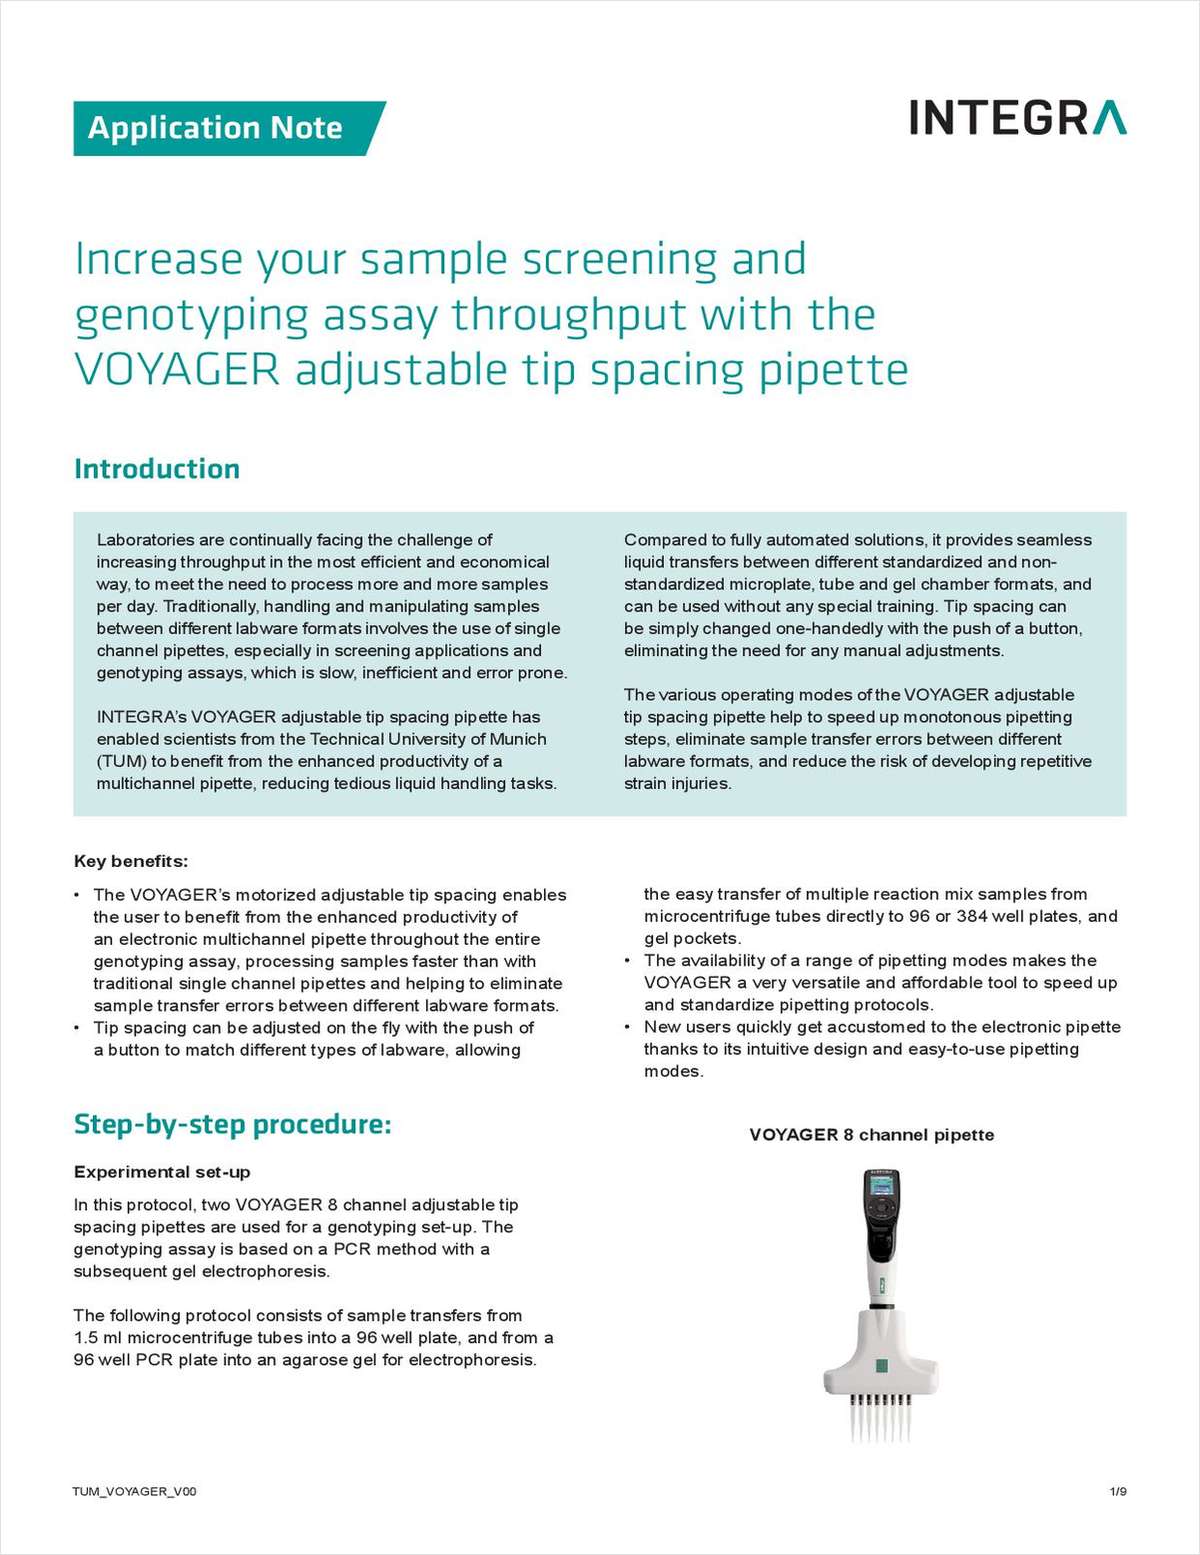 Increase Your Sample Screening and Genotyping Assay Throughput with the VOYAGER Adjustable Tip Spacing Pipette